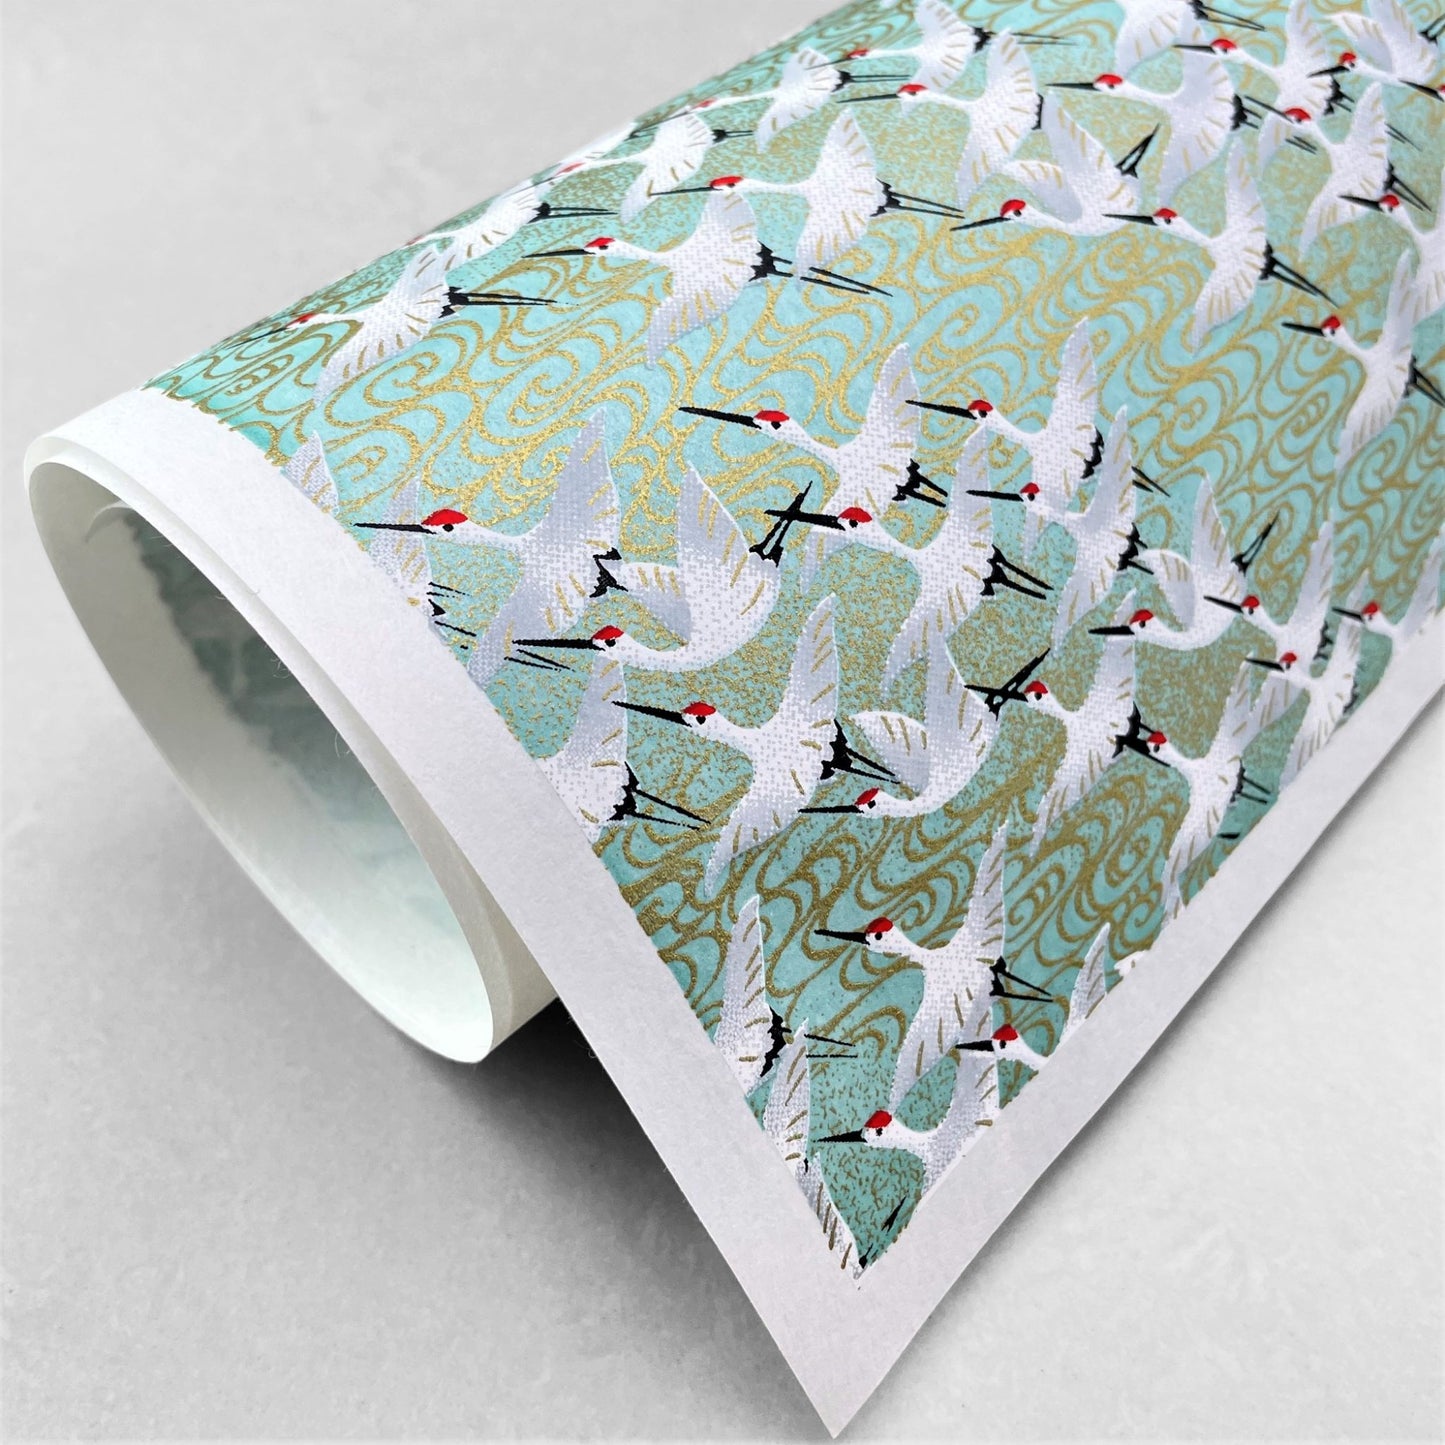 japanese silk-screen handmade paper showing white cranes in flight on a light teal and gold backdrop